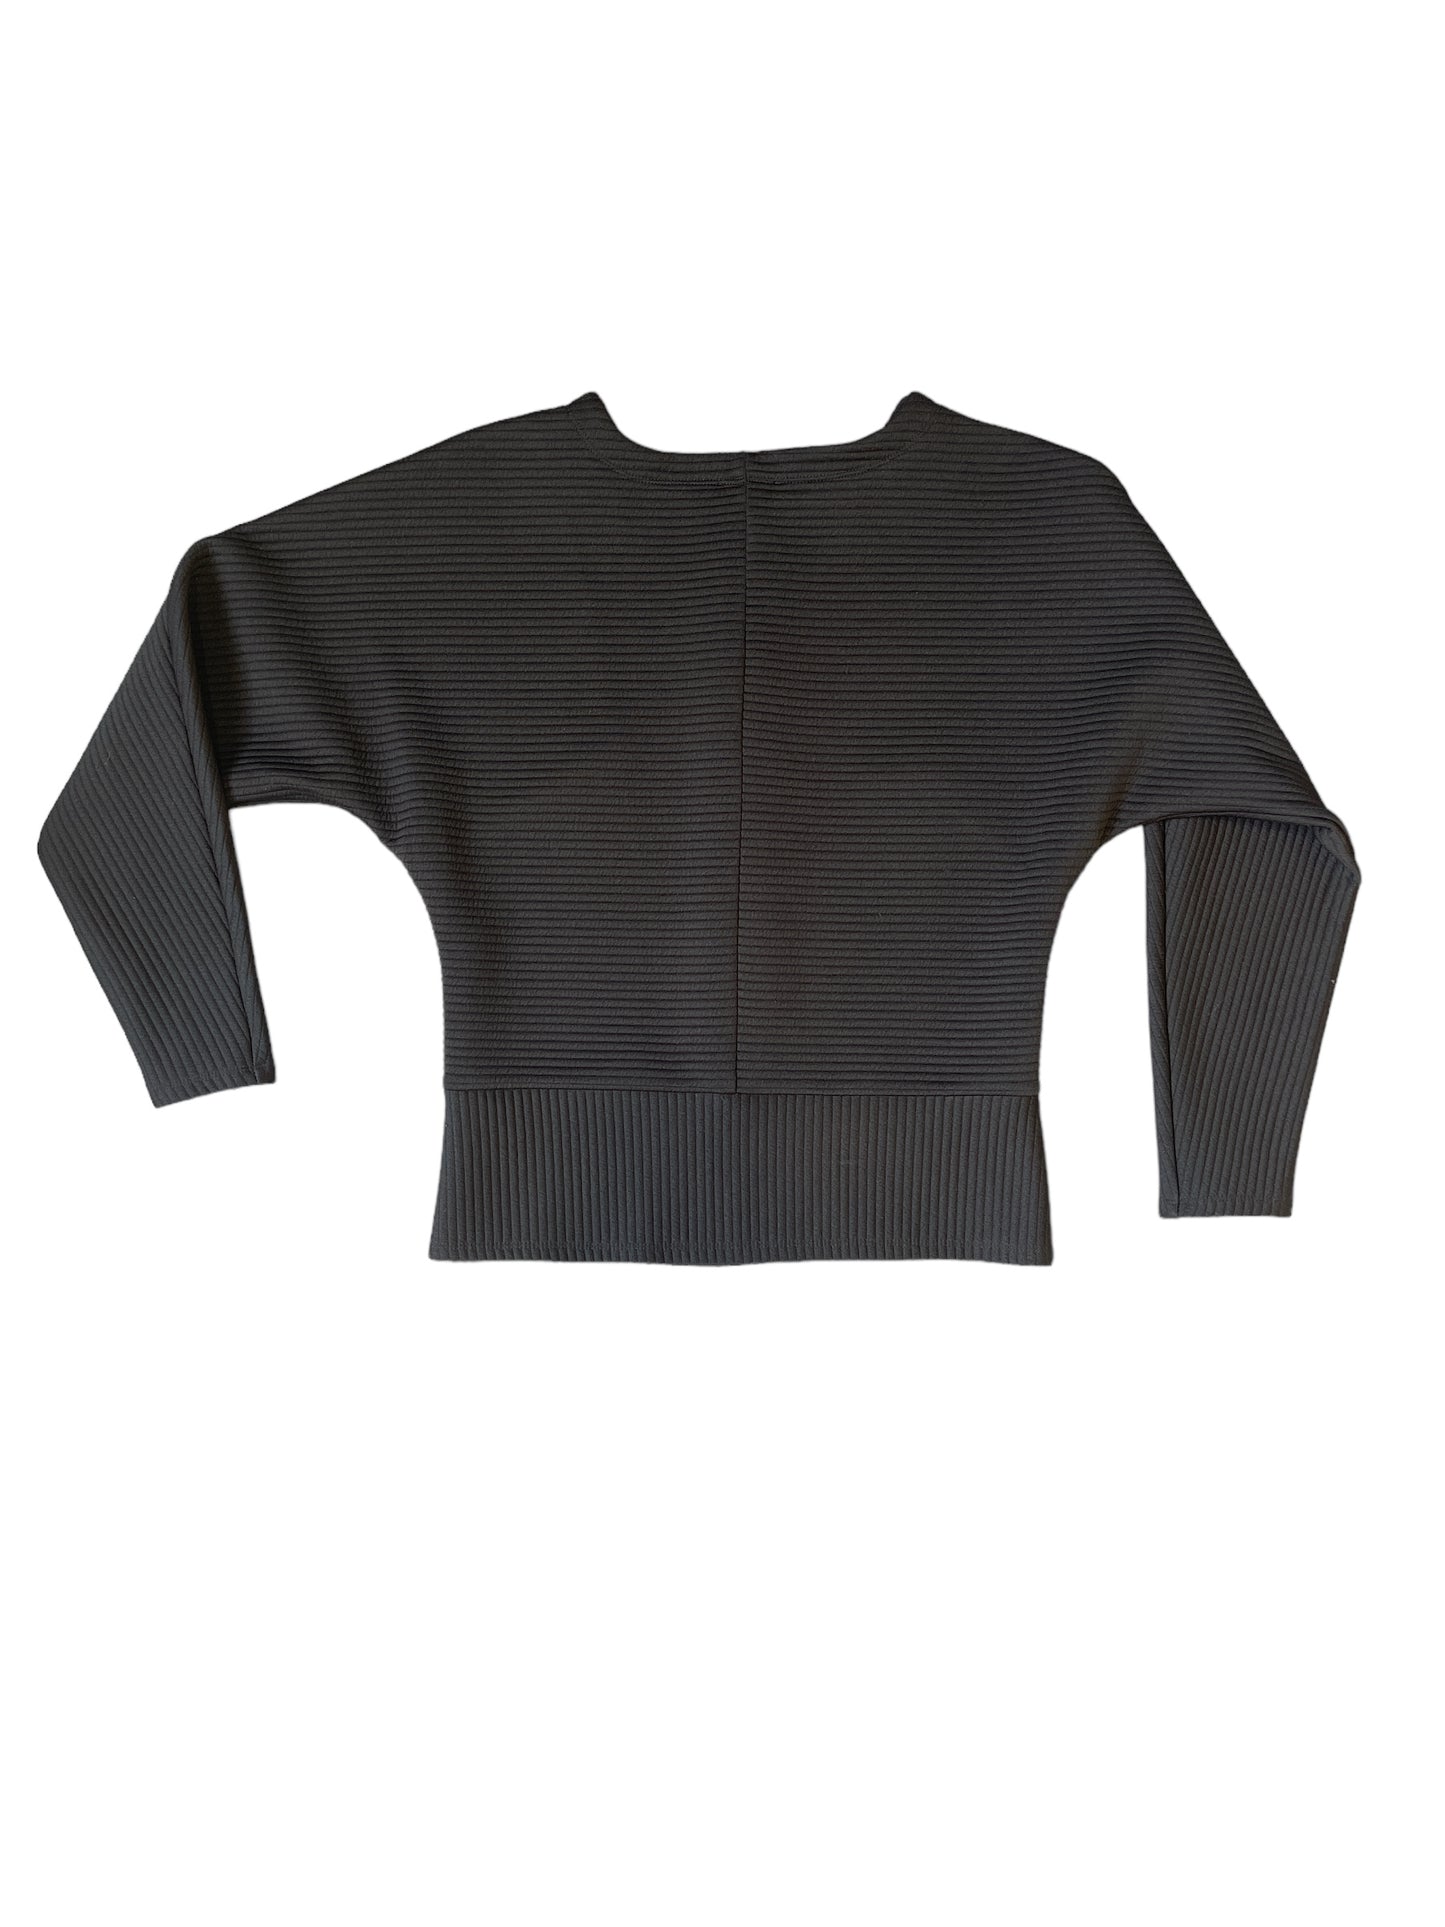 Kenneth Cole Black Ribbed Long Sleeve Top Size S